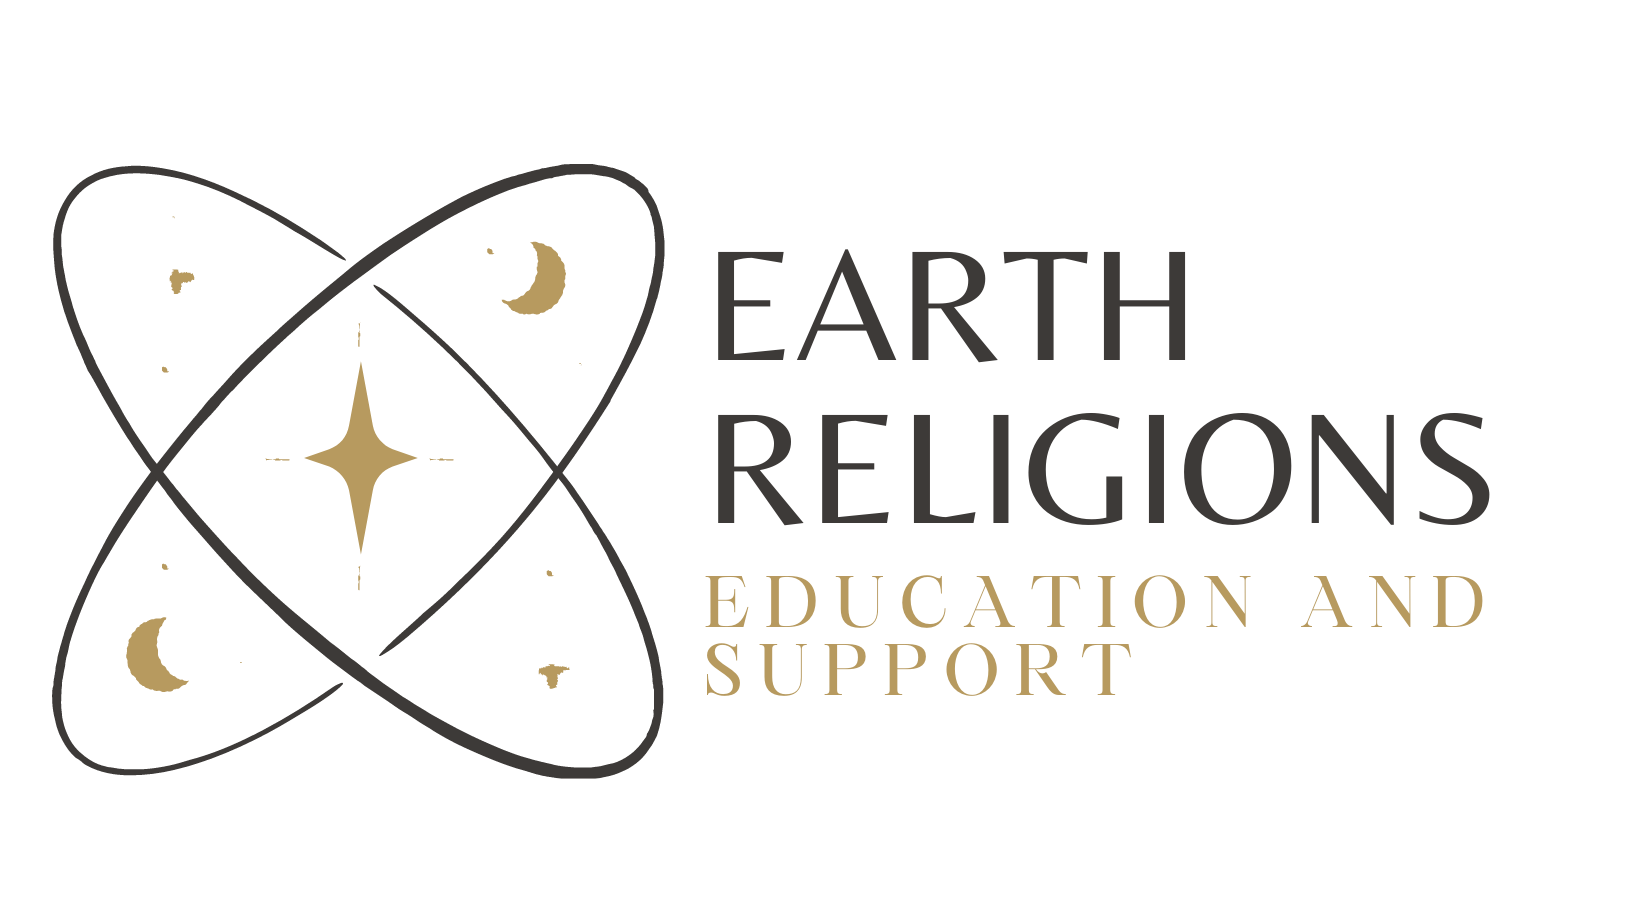 Coalition of Earth Religions for Education and Support